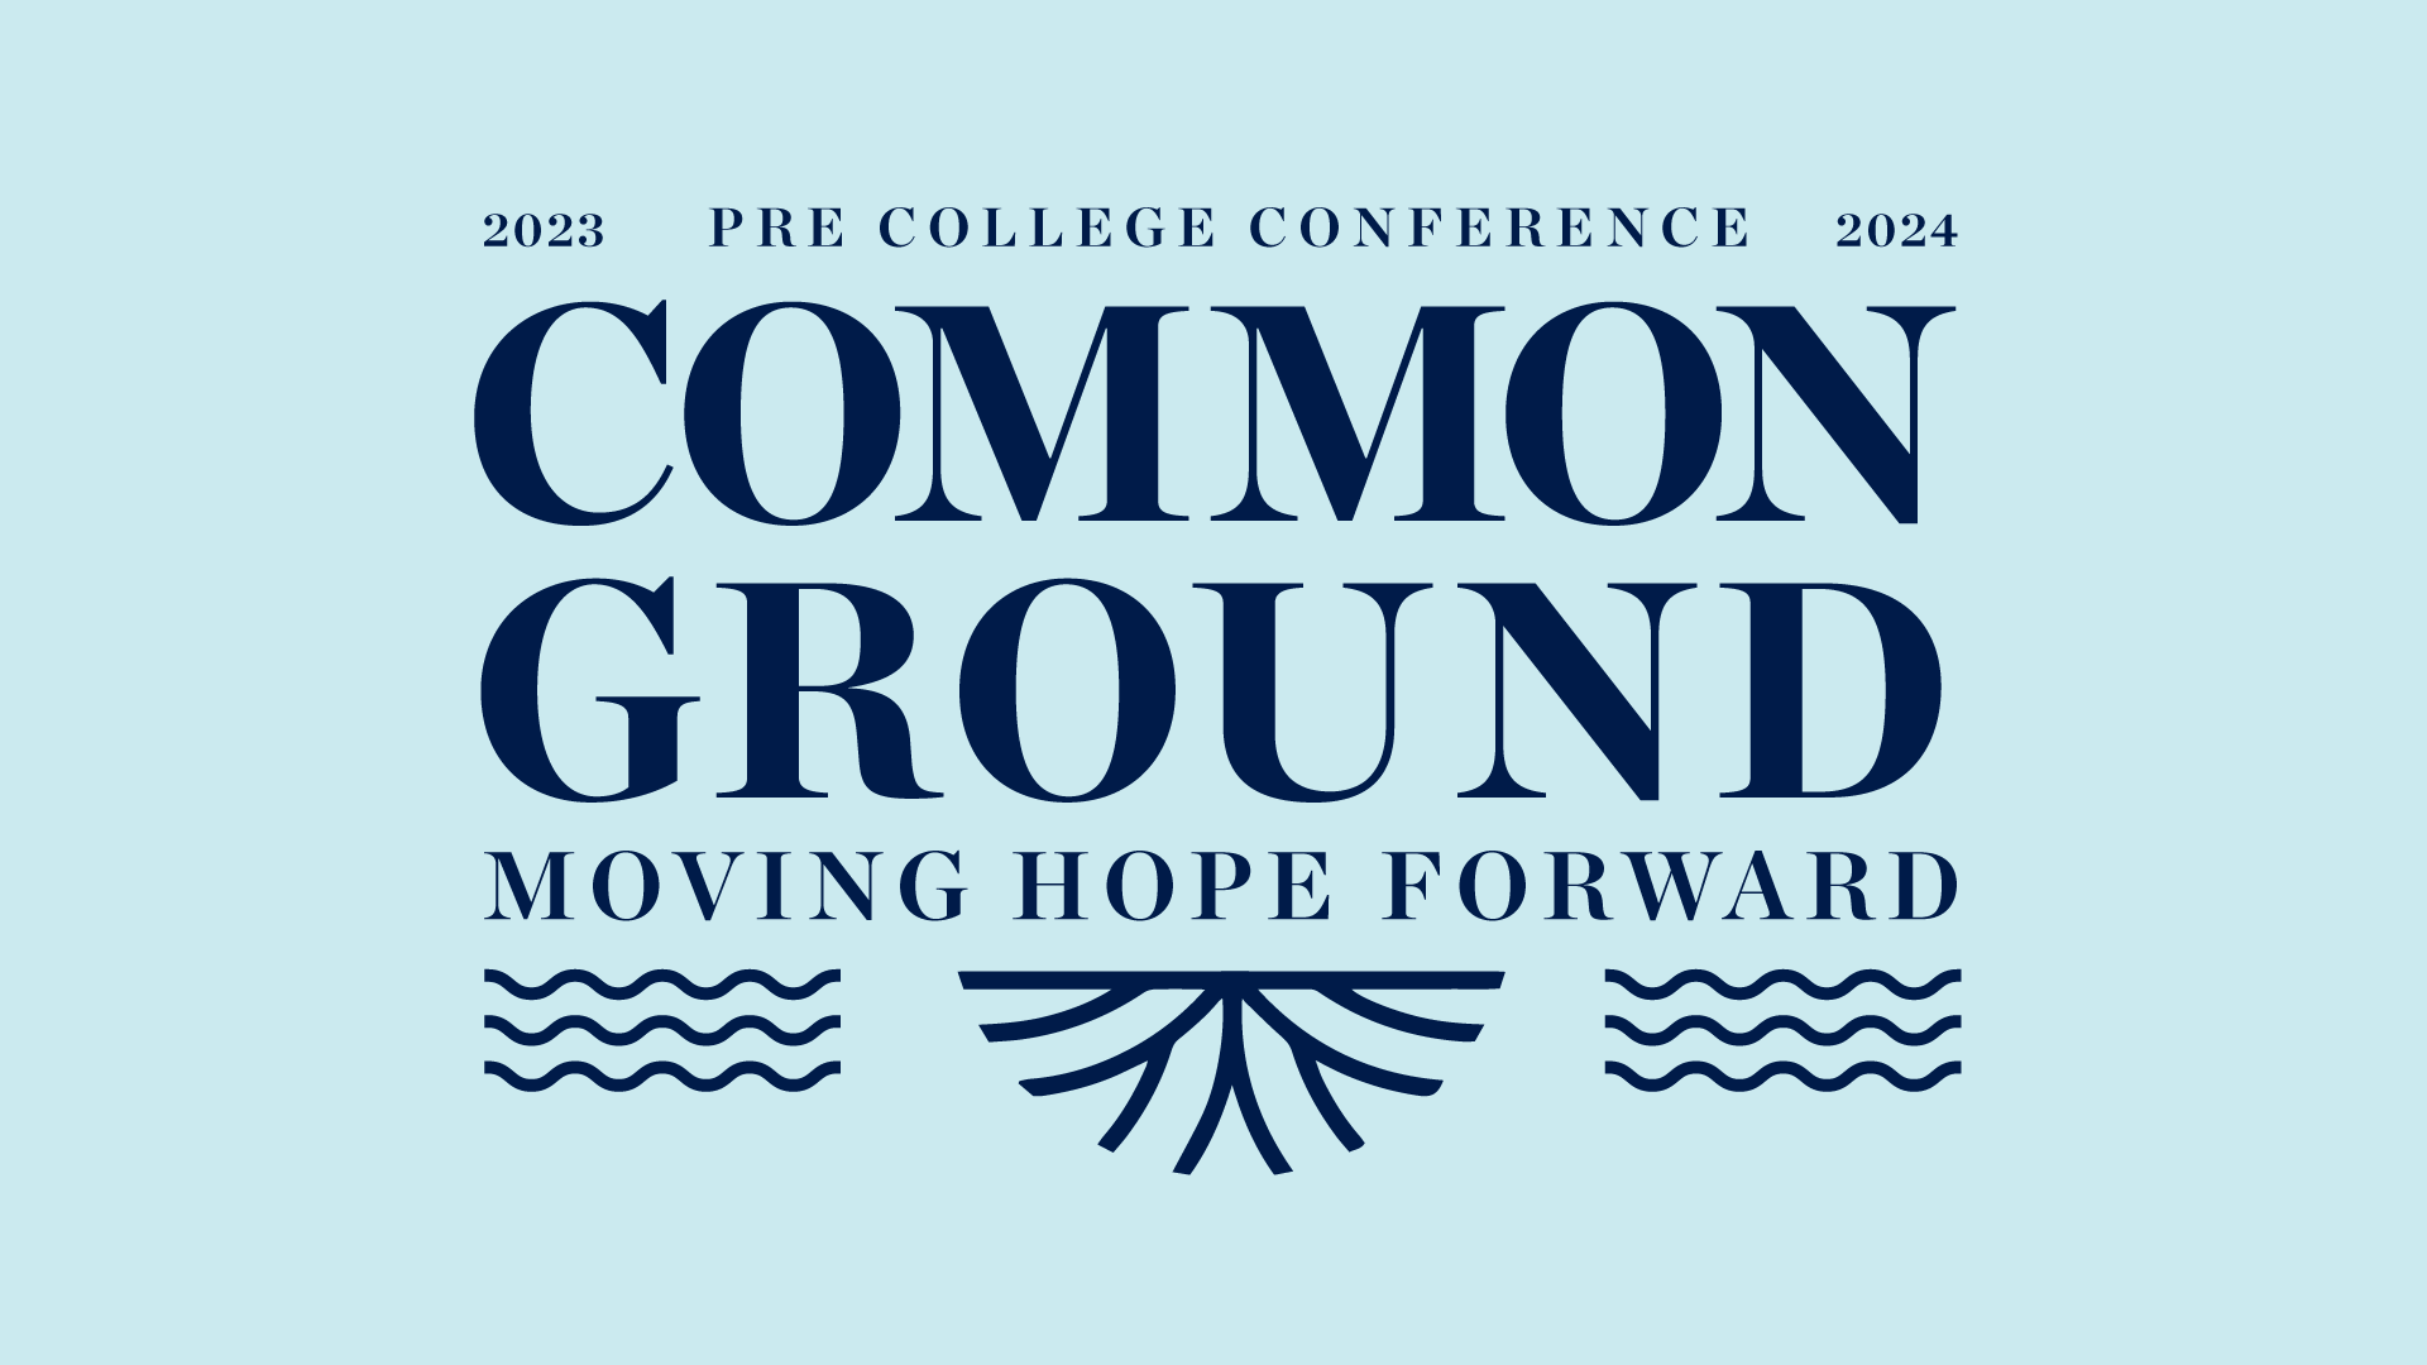 Common Ground Moving Hope Forward